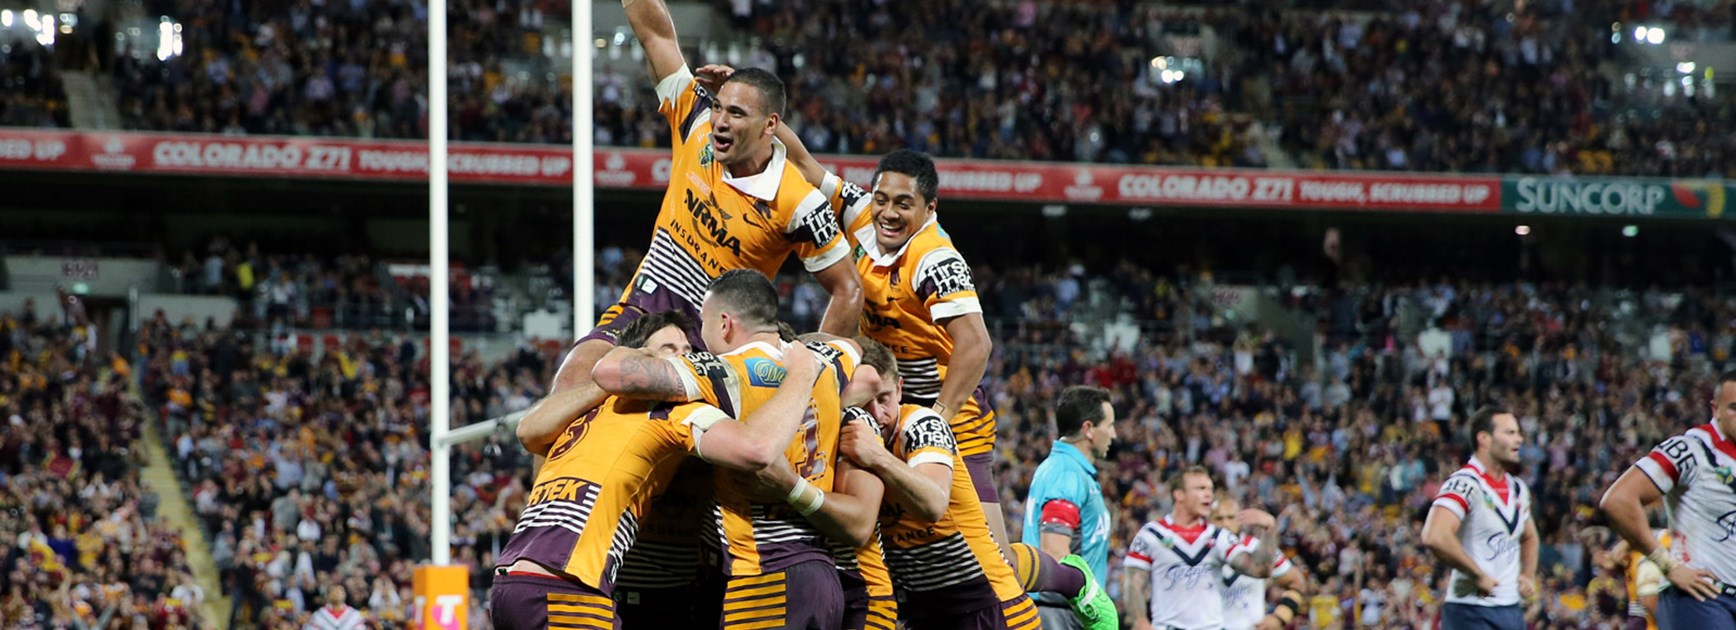 The Broncos celebrated their preliminary final win in style.